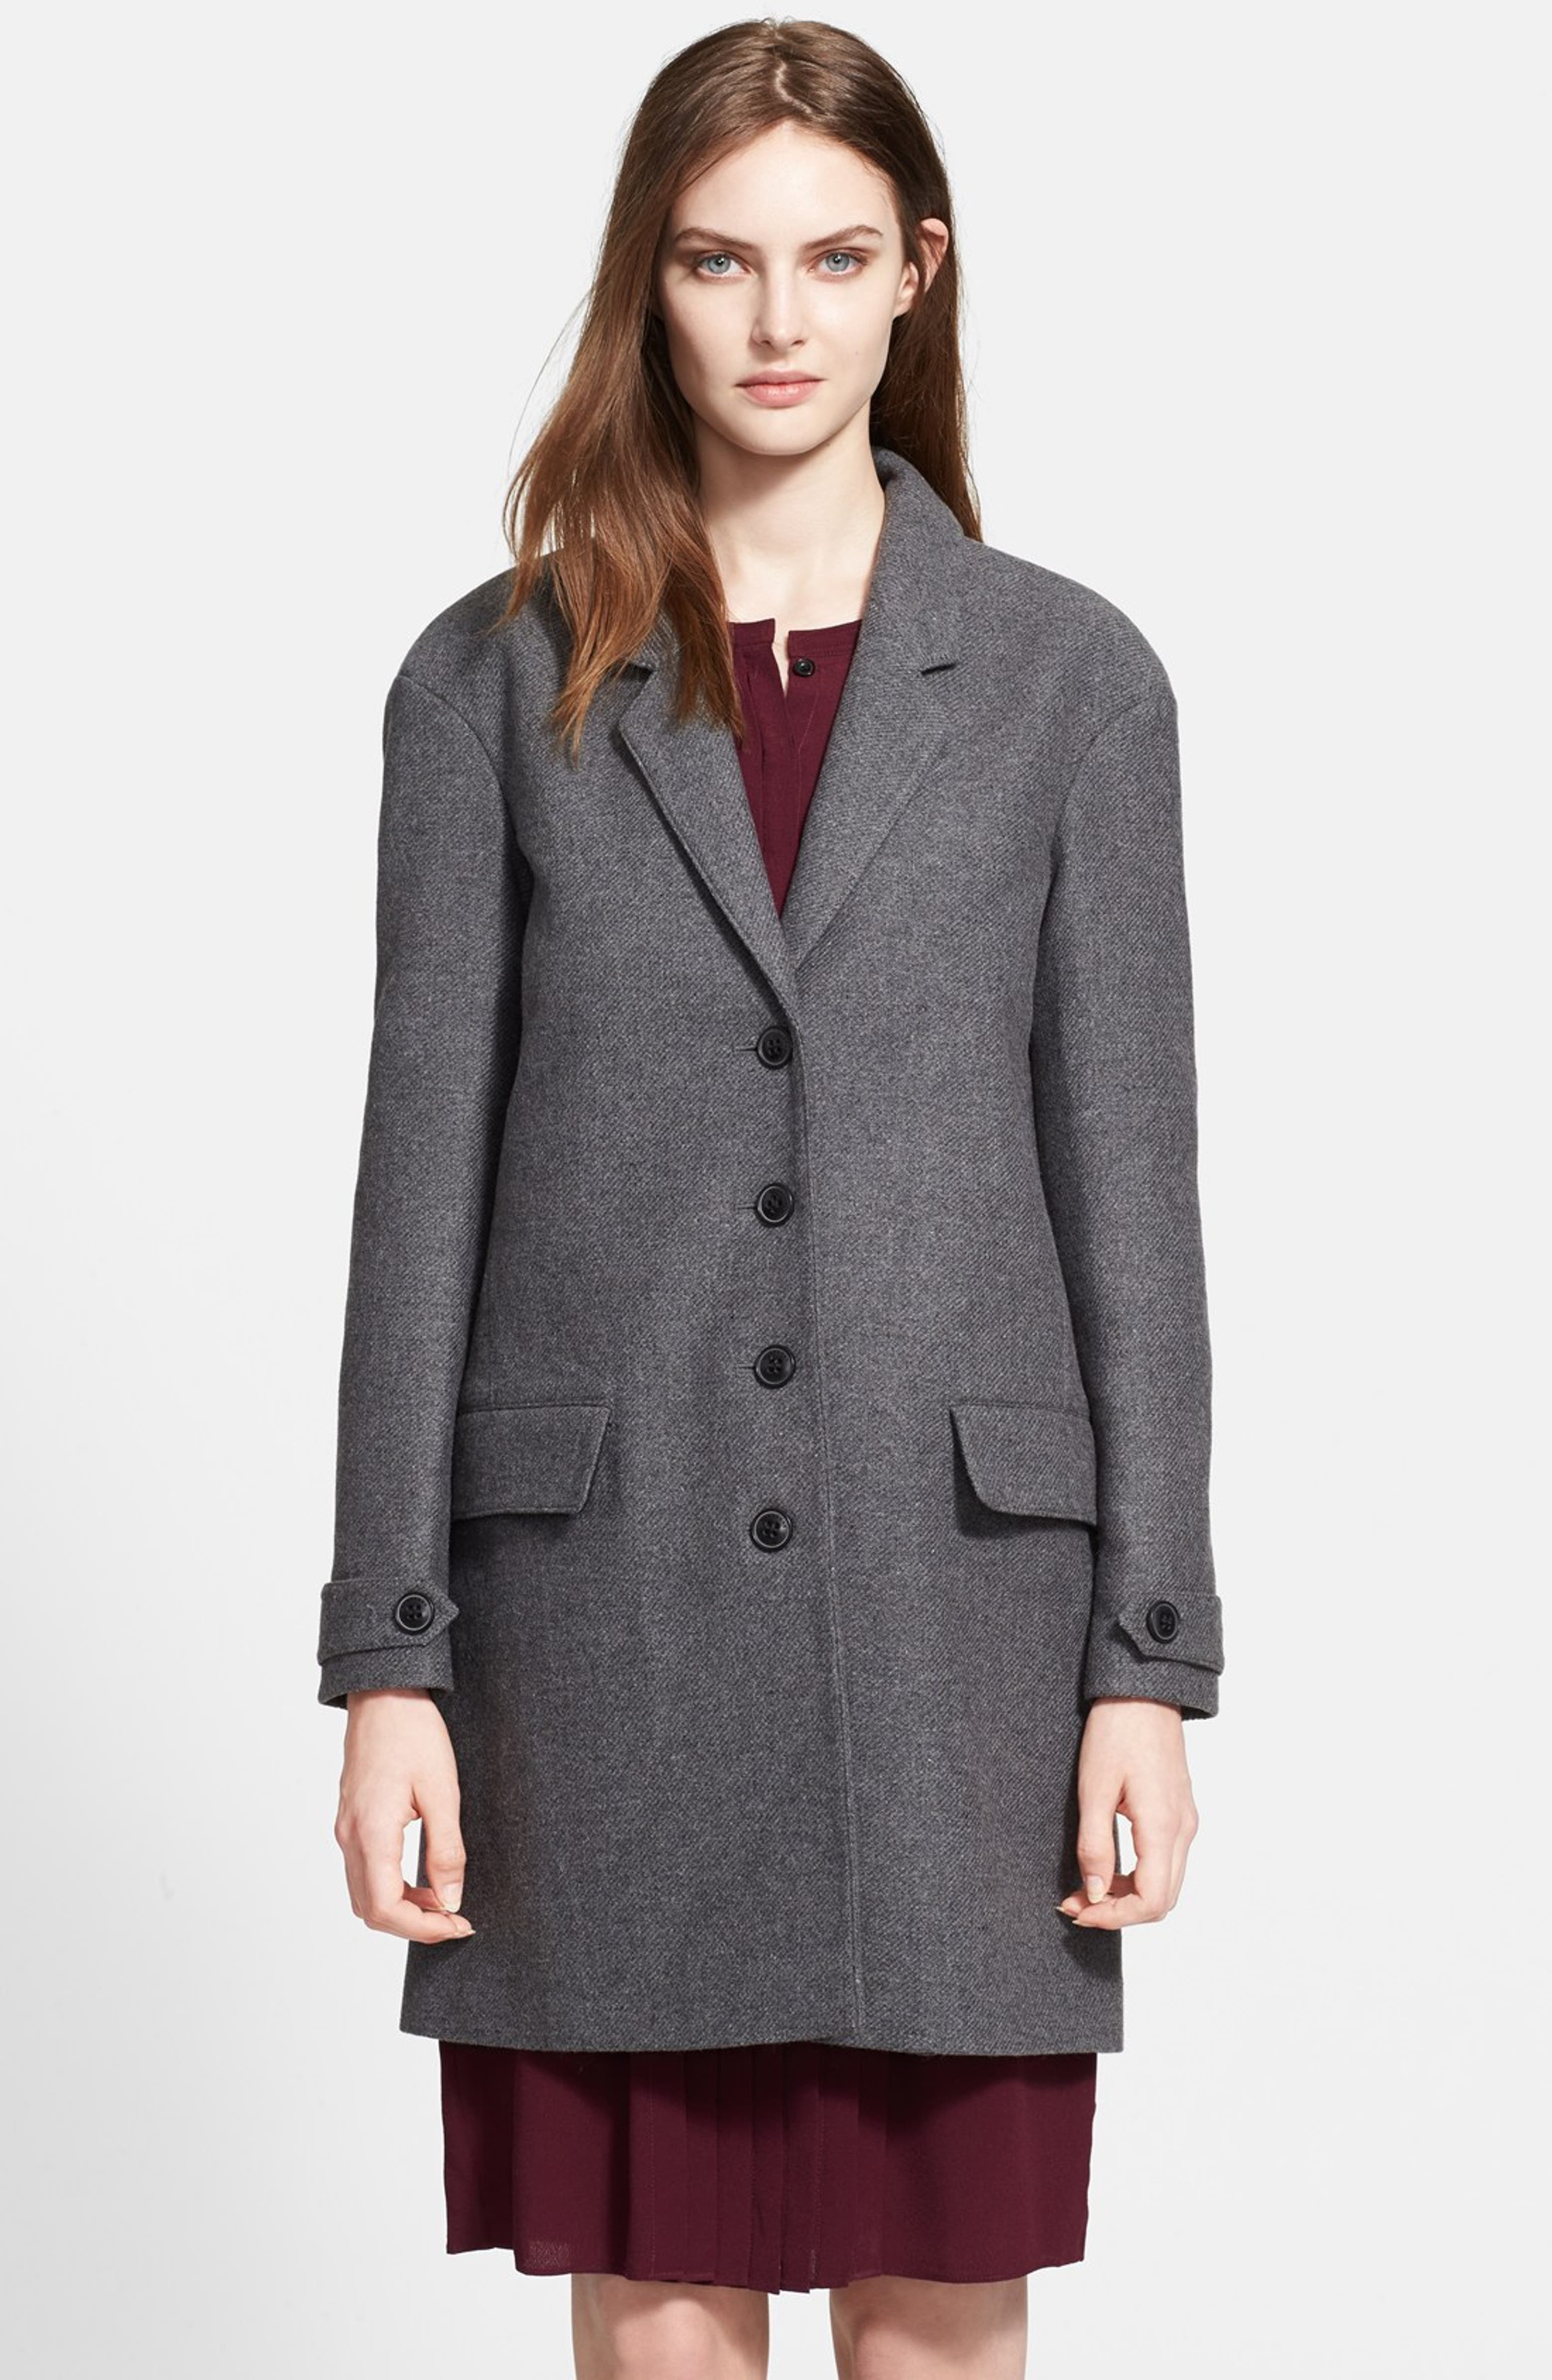 Burberry Brit 'Camford' Single Breasted Wool Blend Coat | Nordstrom